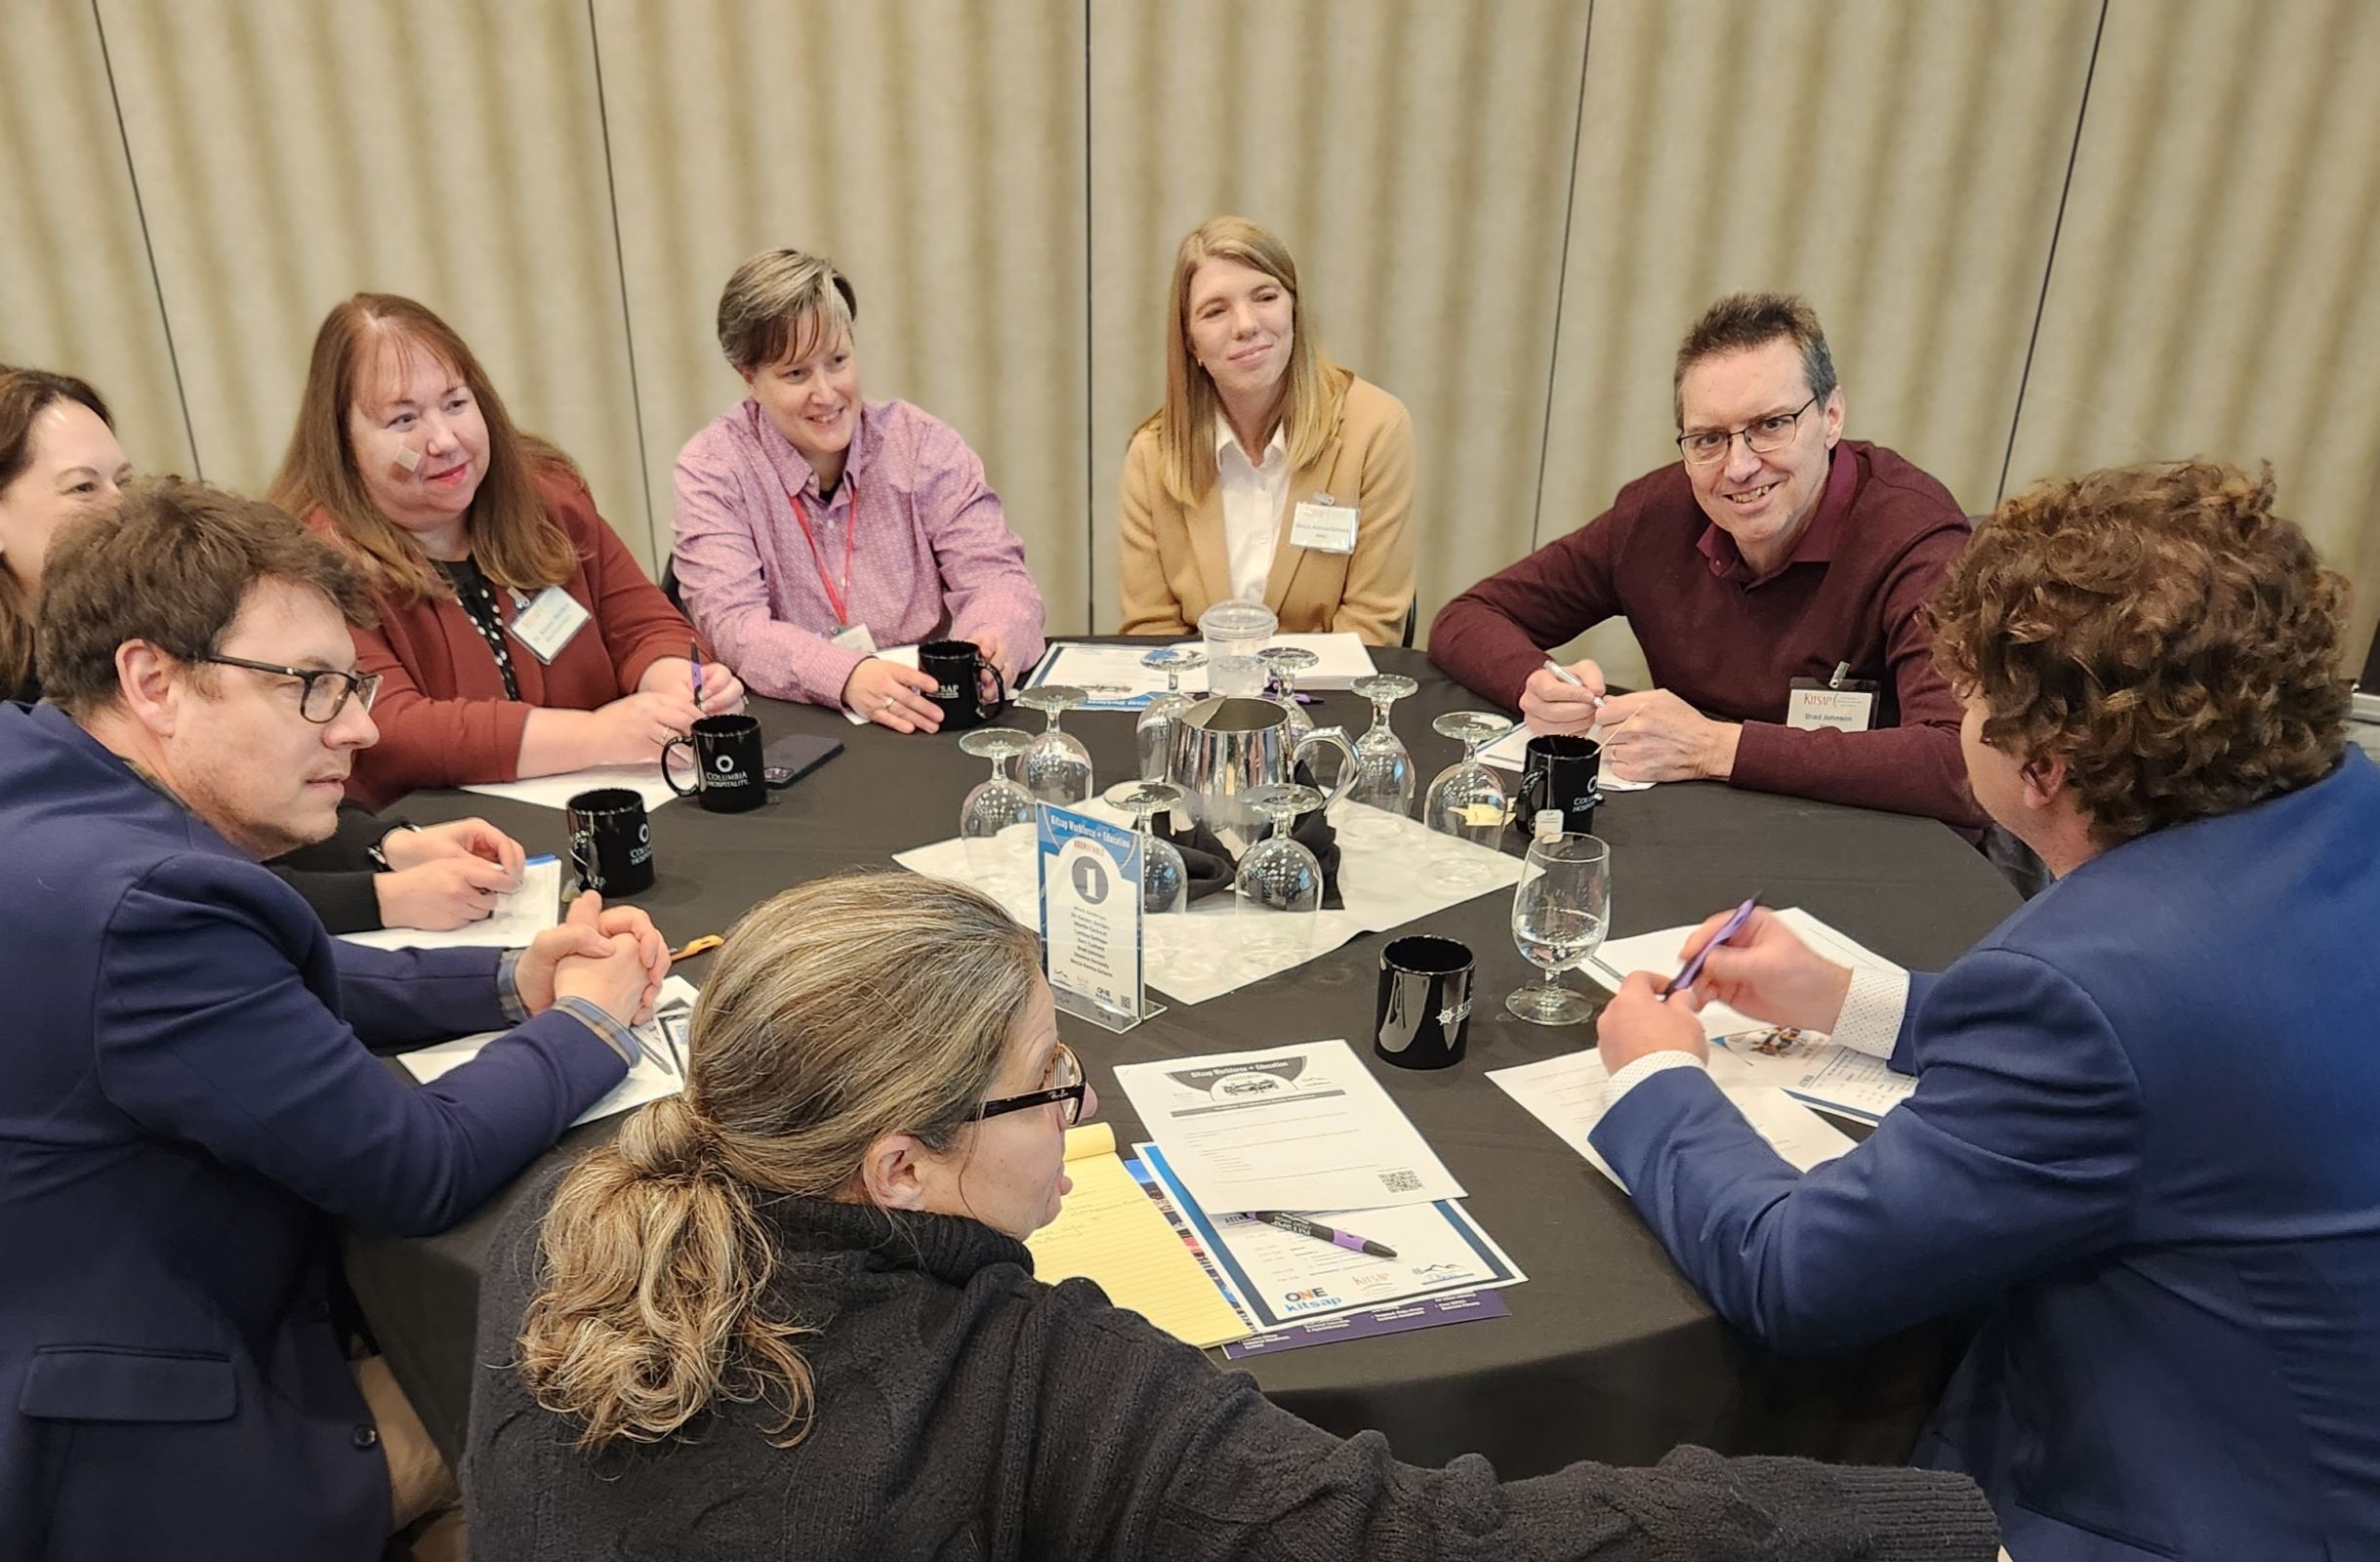 Kitsap County Celebrates CTE Month with a Focus on Workforce Development: Insights from the KEDA OWDC Workforce + Education Roundtable Main Photo